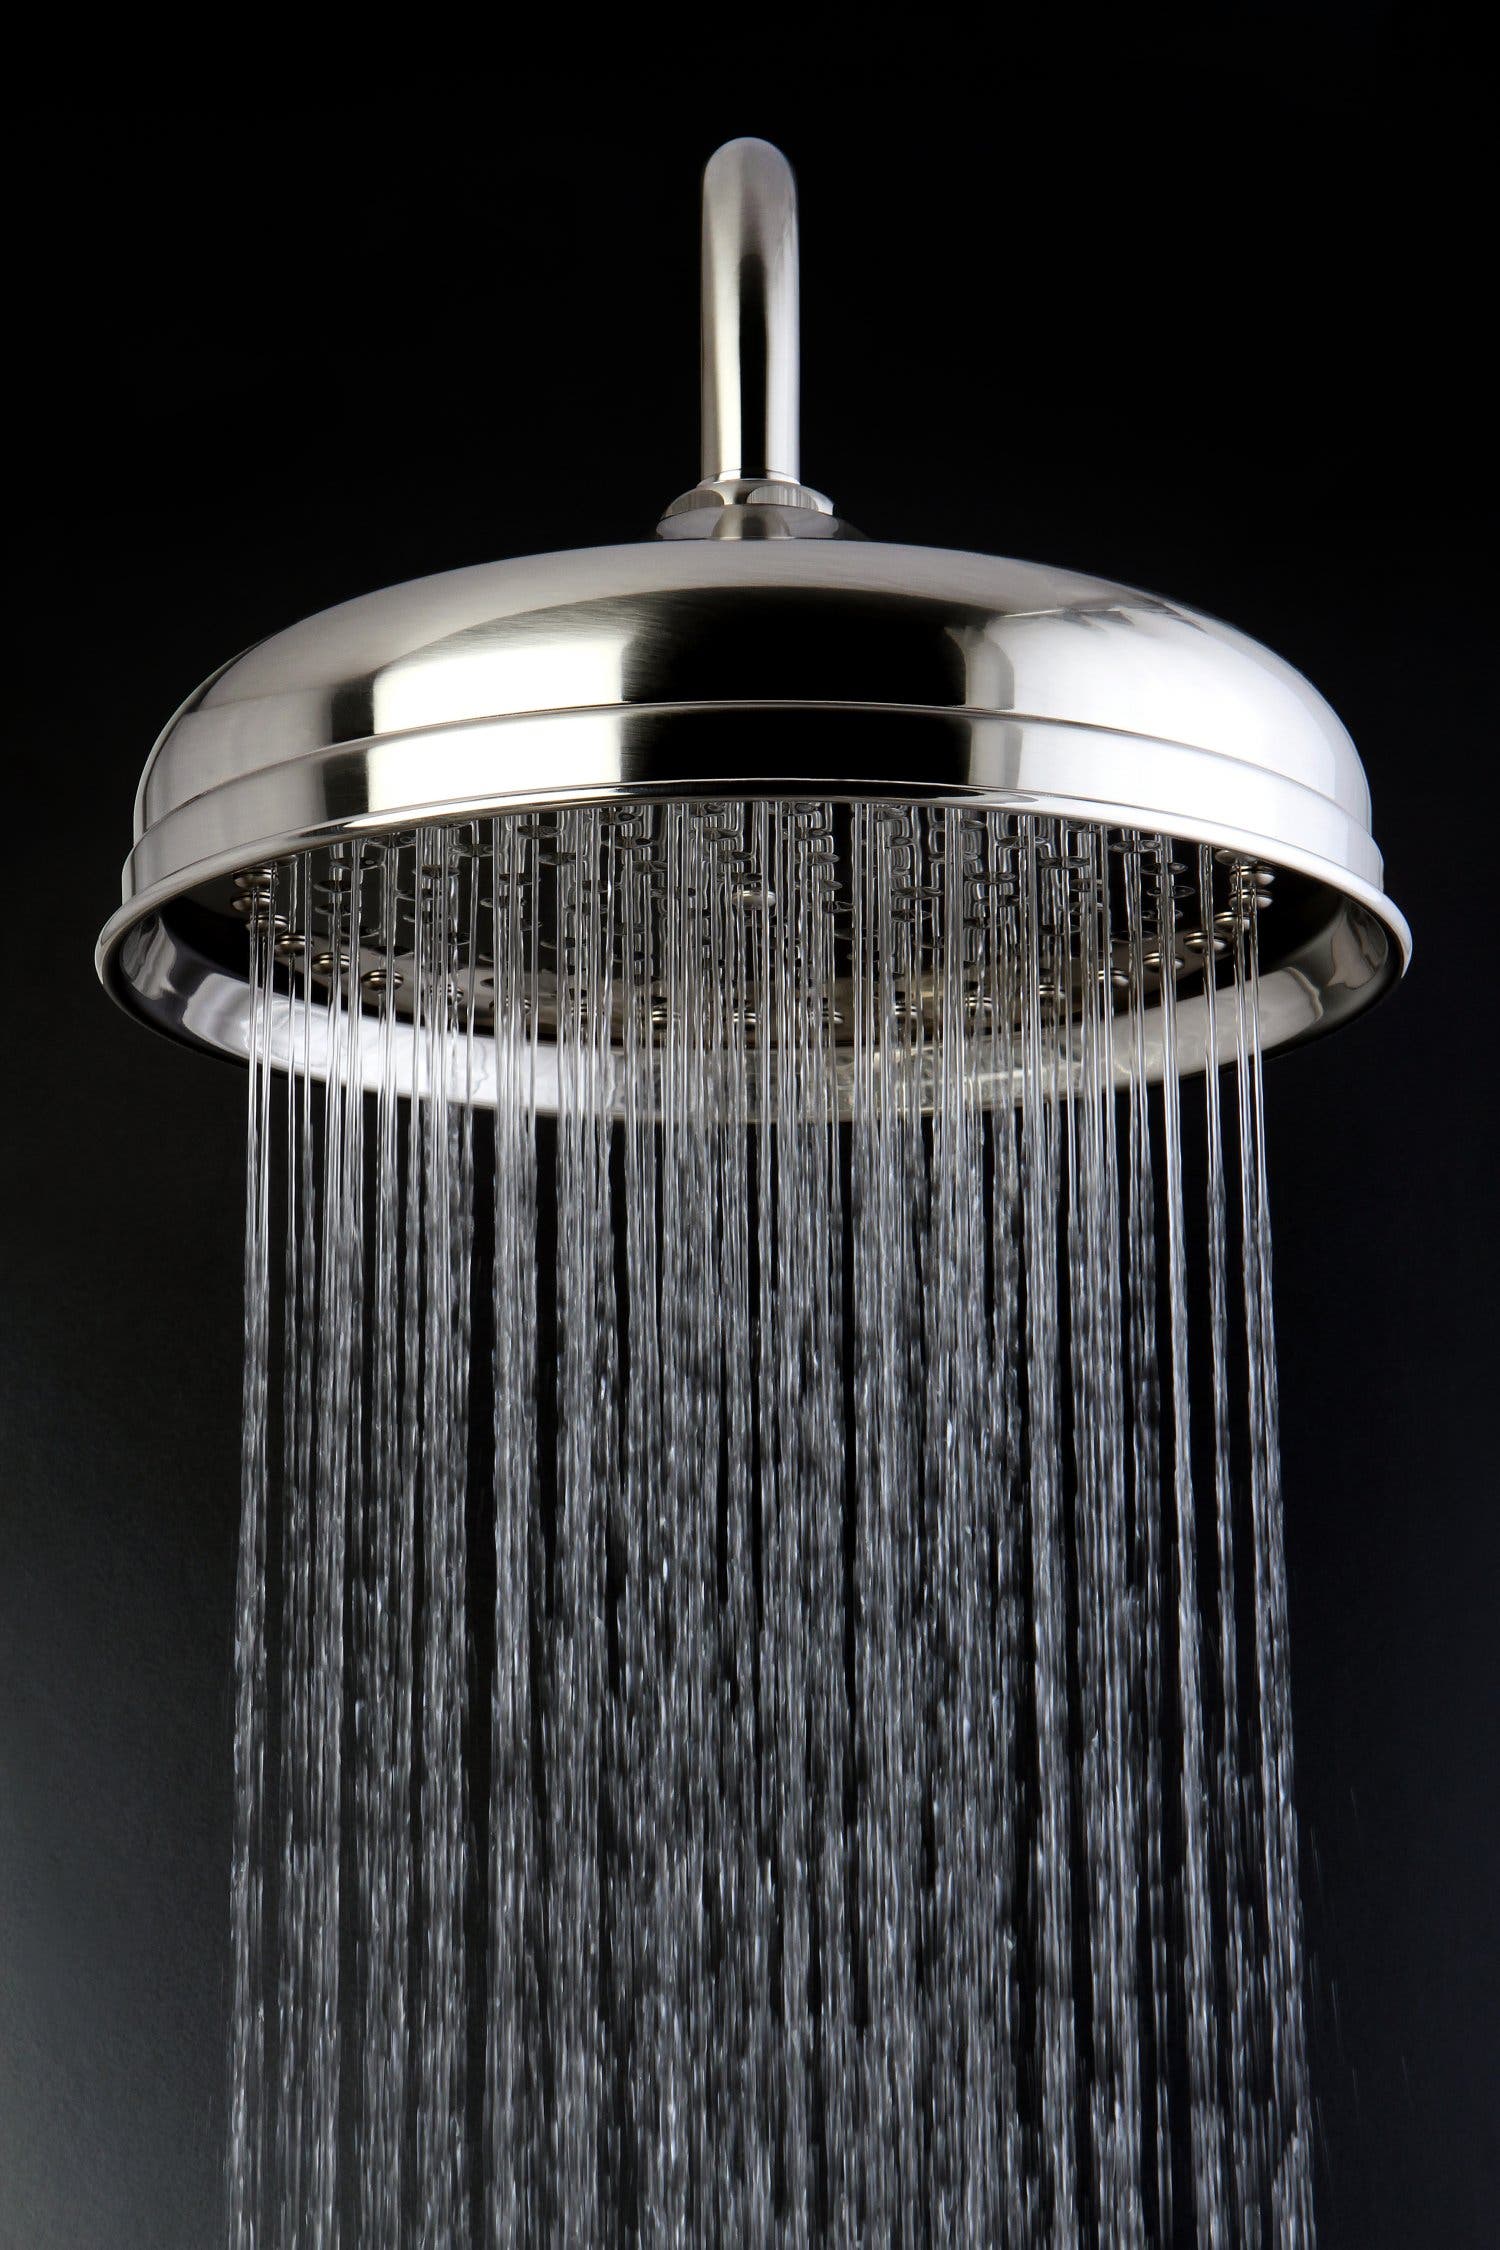 Let's Get This Bread with the Victorian Showerhead, K125A8